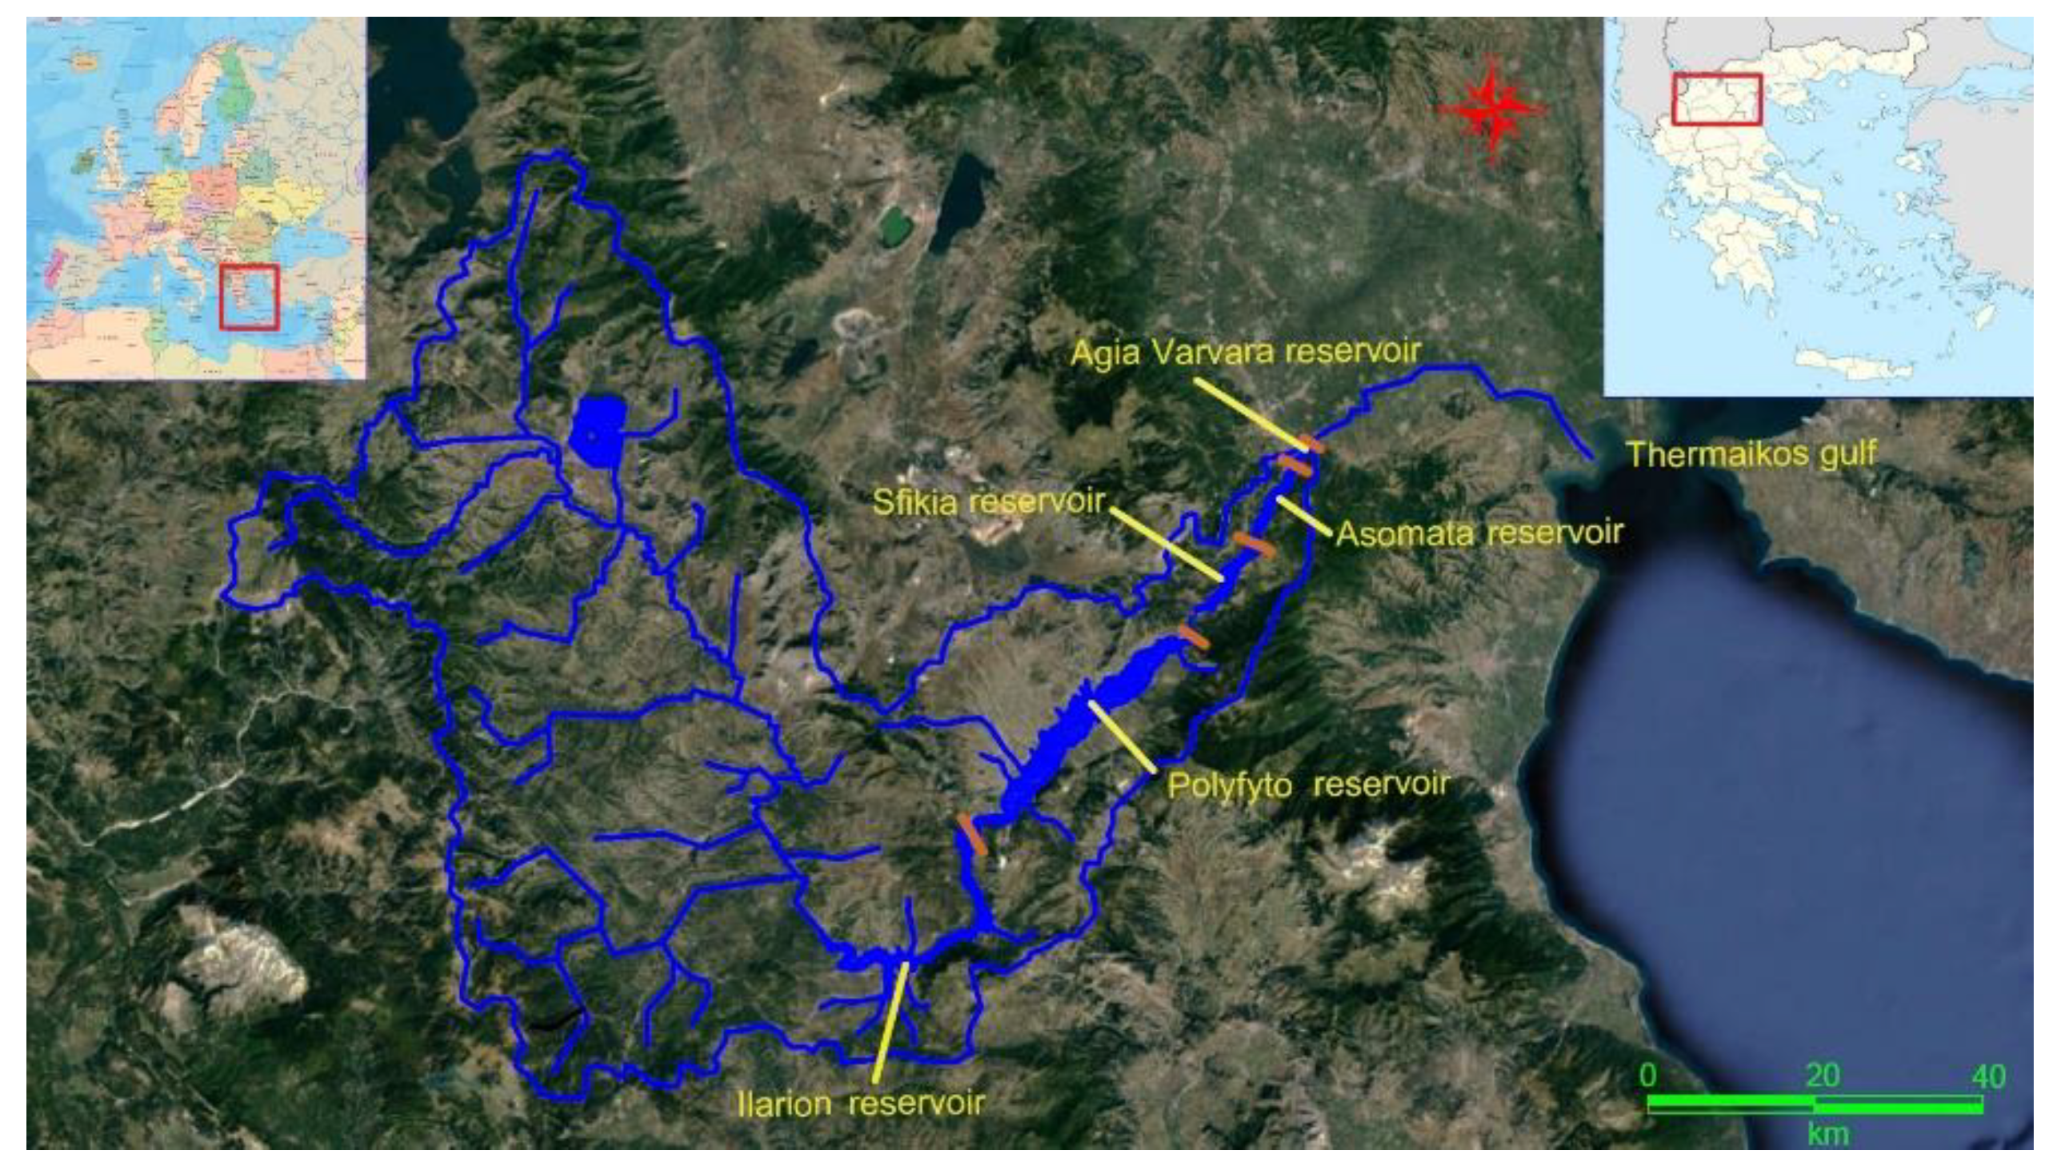 Energies | Free Full-Text | Optimizing Current and Future Hydroelectric  Energy Production and Water Uses of the Complex Multi-Reservoir System in  the Aliakmon River, Greece | HTML